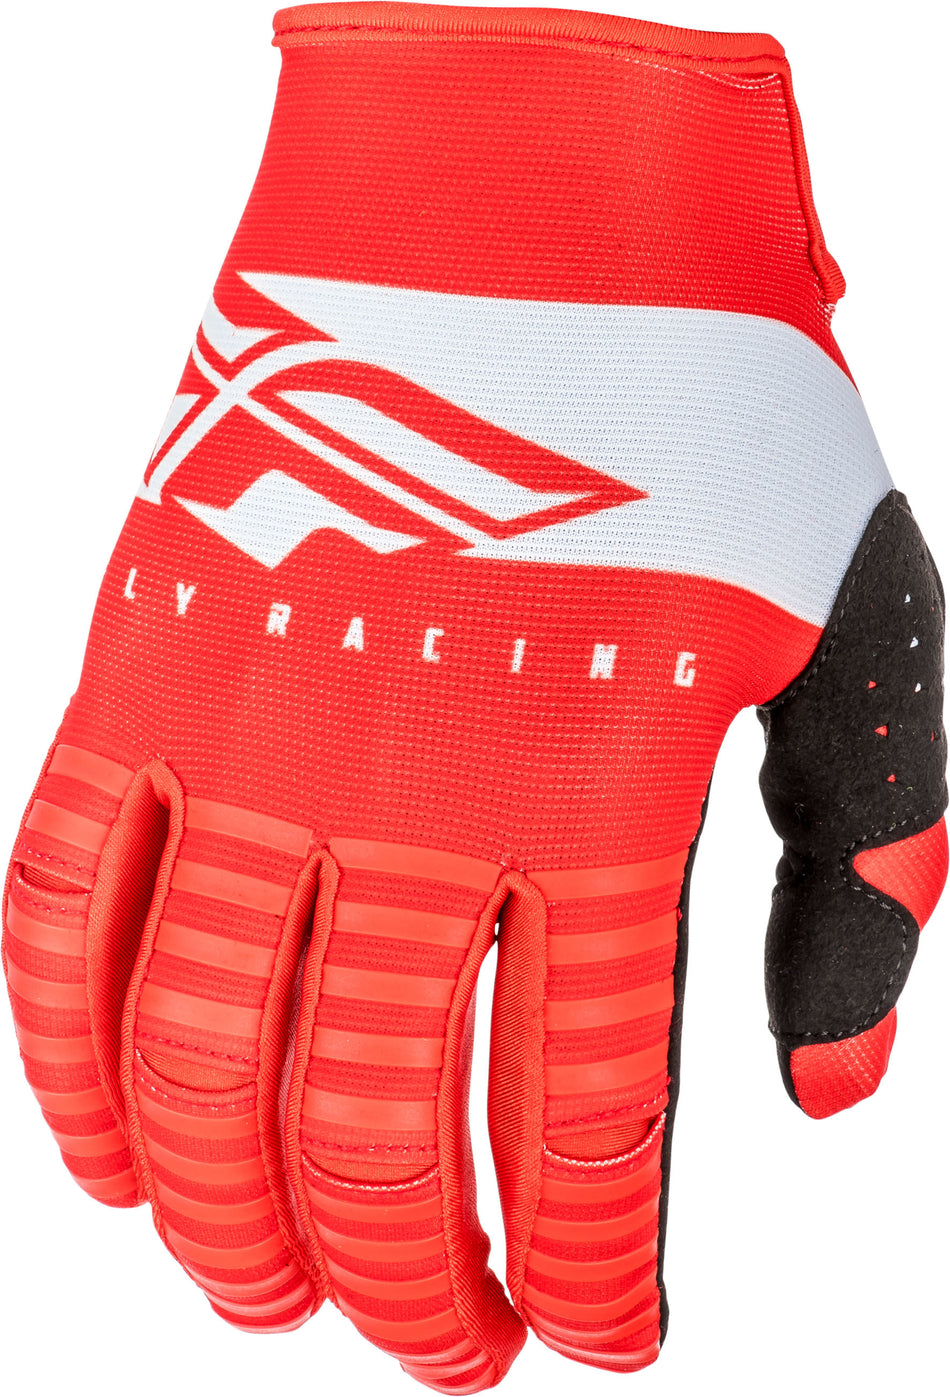 FLY RACING Kinetic Shield Gloves Red/White Sz 06 372-41206